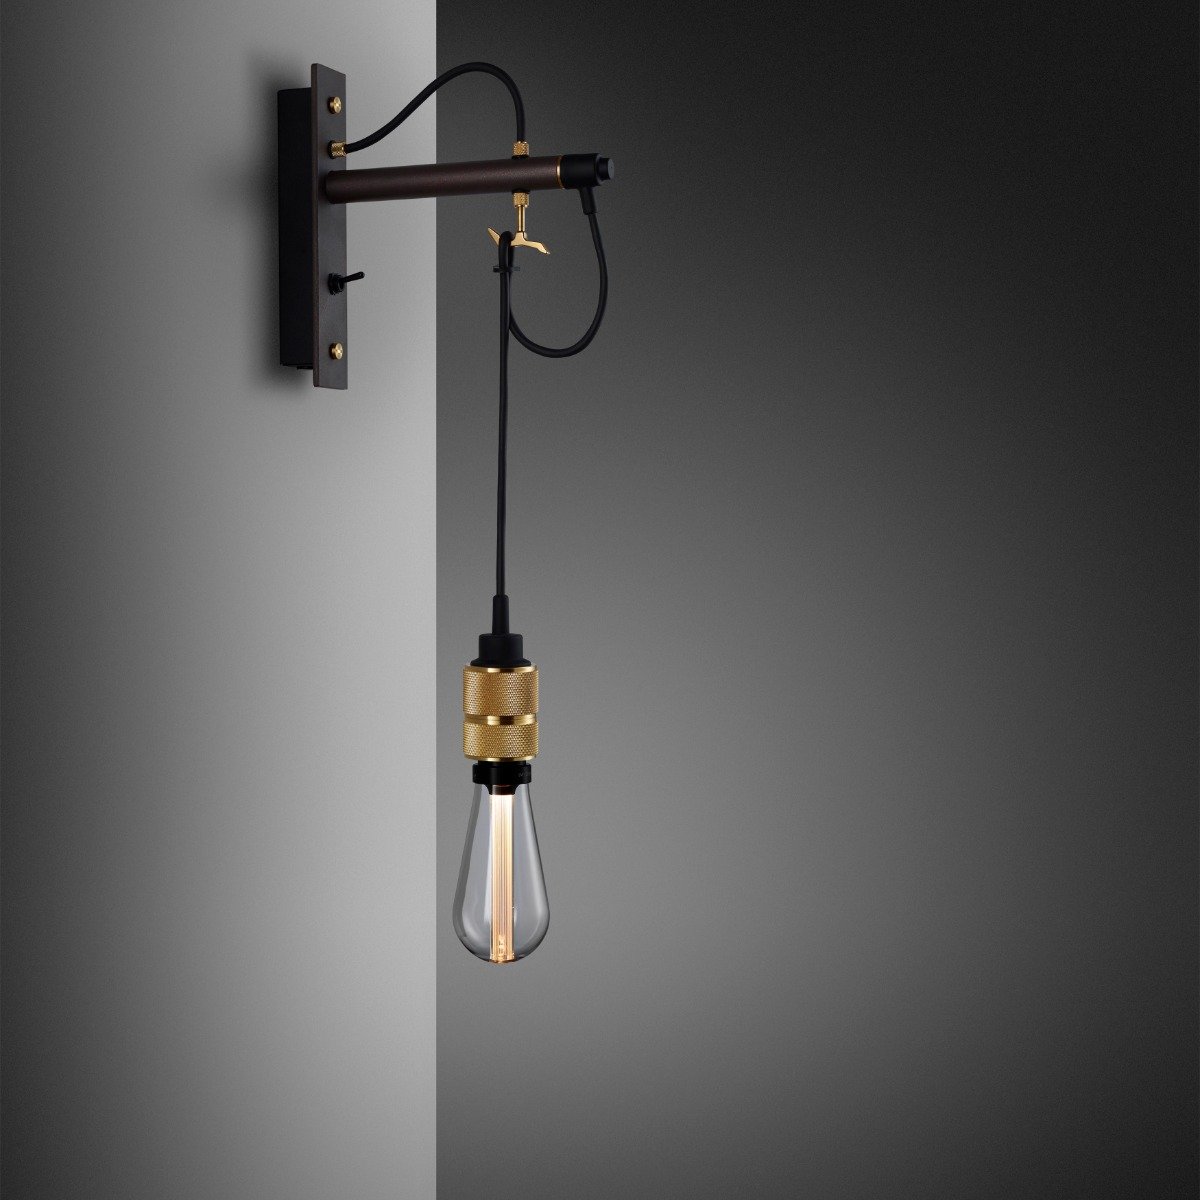 1. Hooked_Wall_Graphite_Brass_Crystal_Bulb.jpg